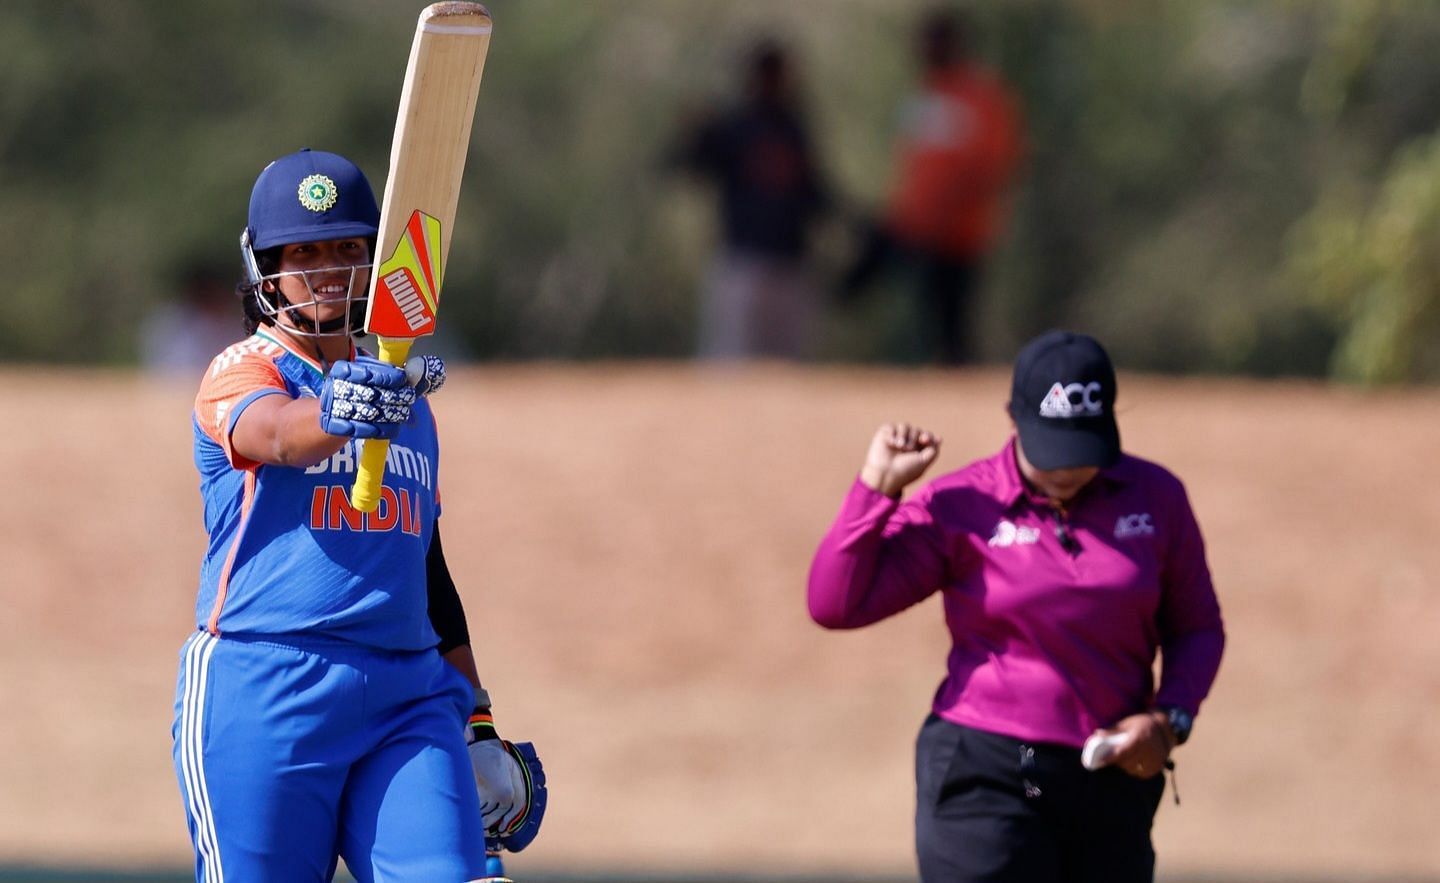 “Lady Dhoni” - Fans react as Richa Ghosh smashes 64 runs off 29 balls during the IND-W vs UAE-W Asia Cup game